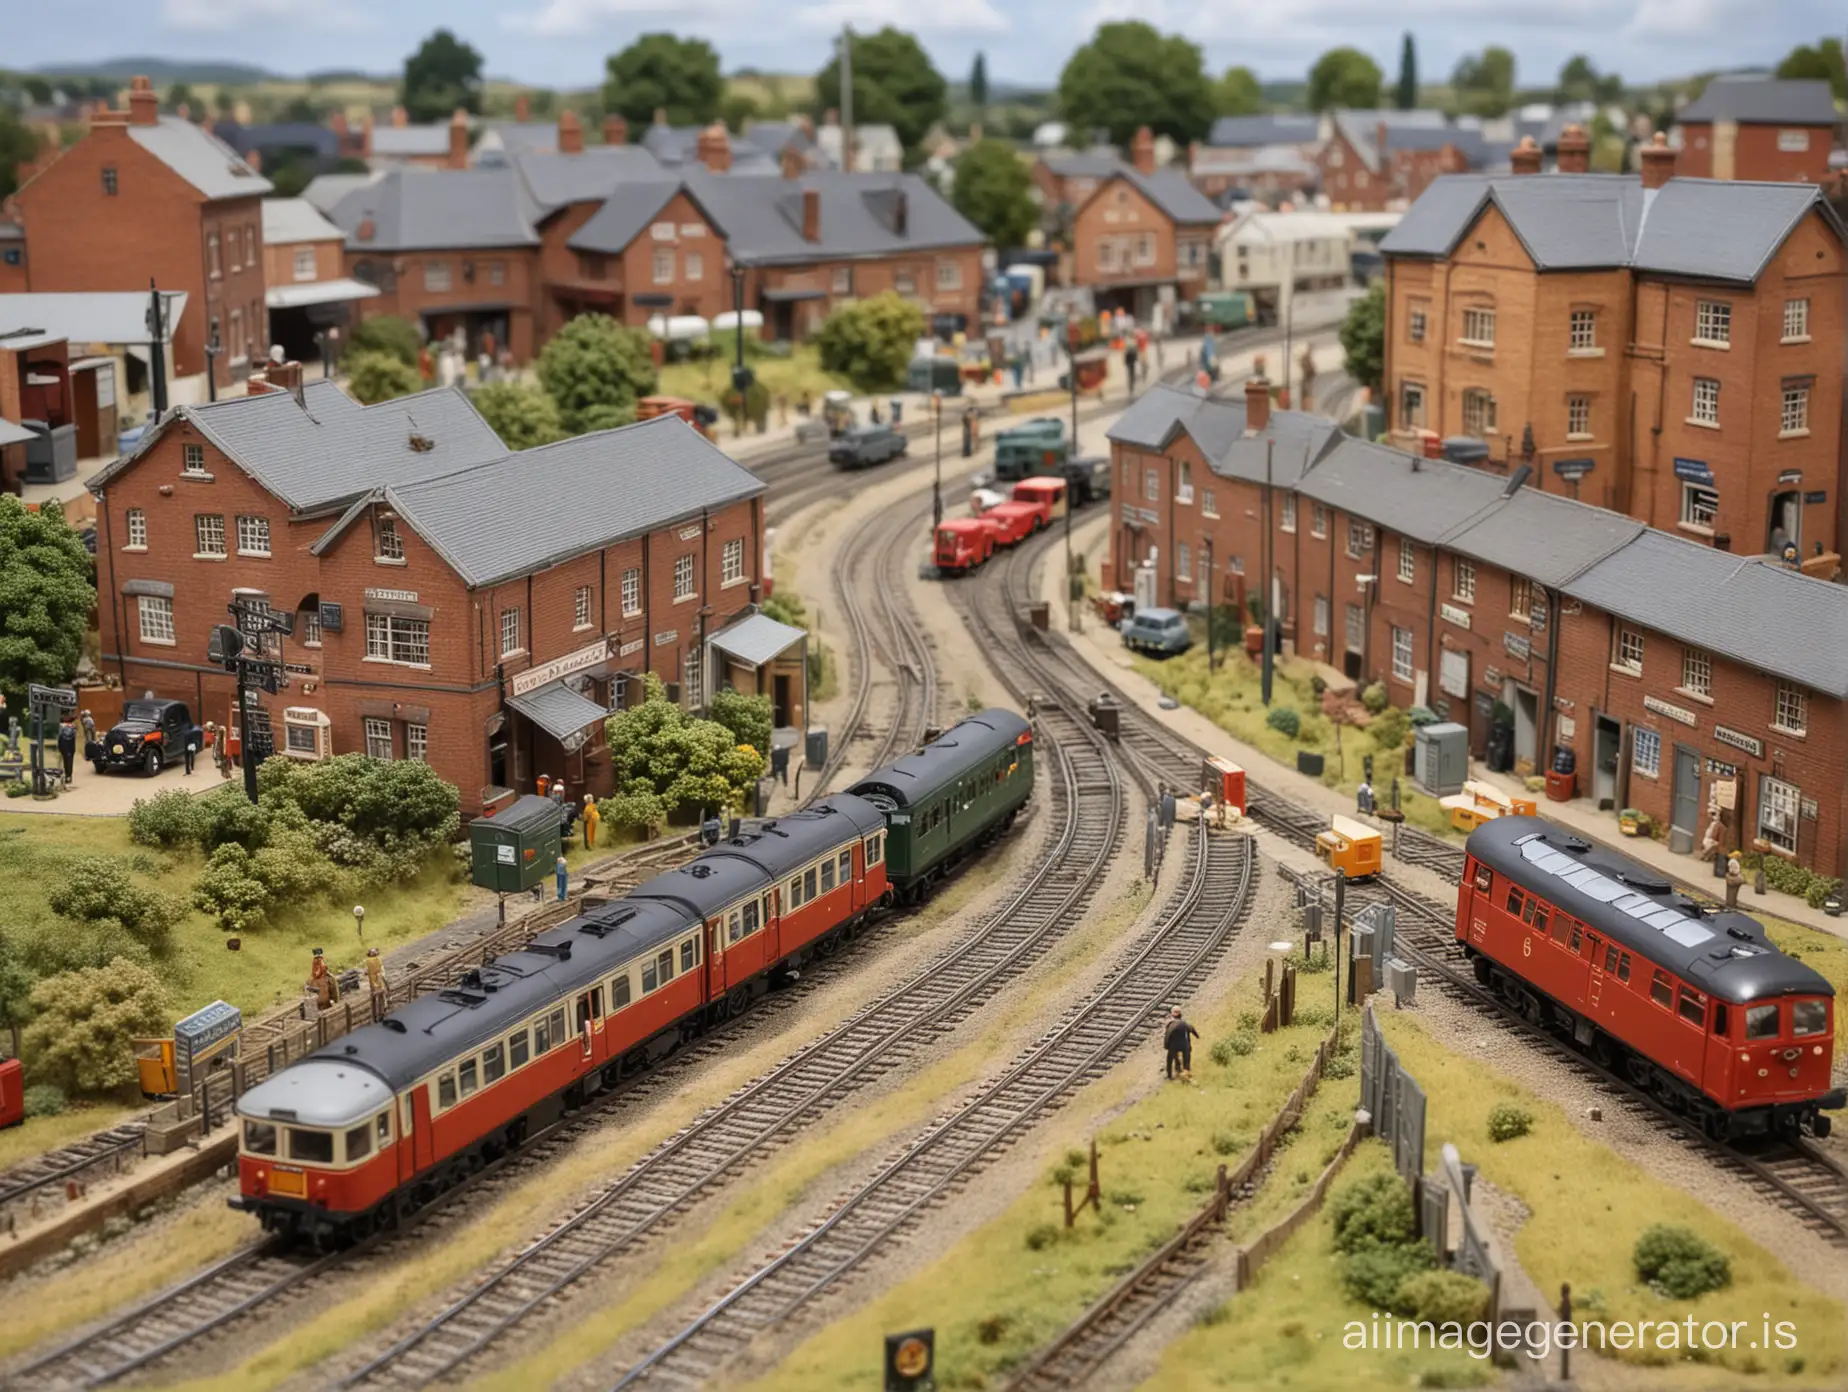 model railway minature diorama with track, signal box steam train and bus at level crossing with factory in the background